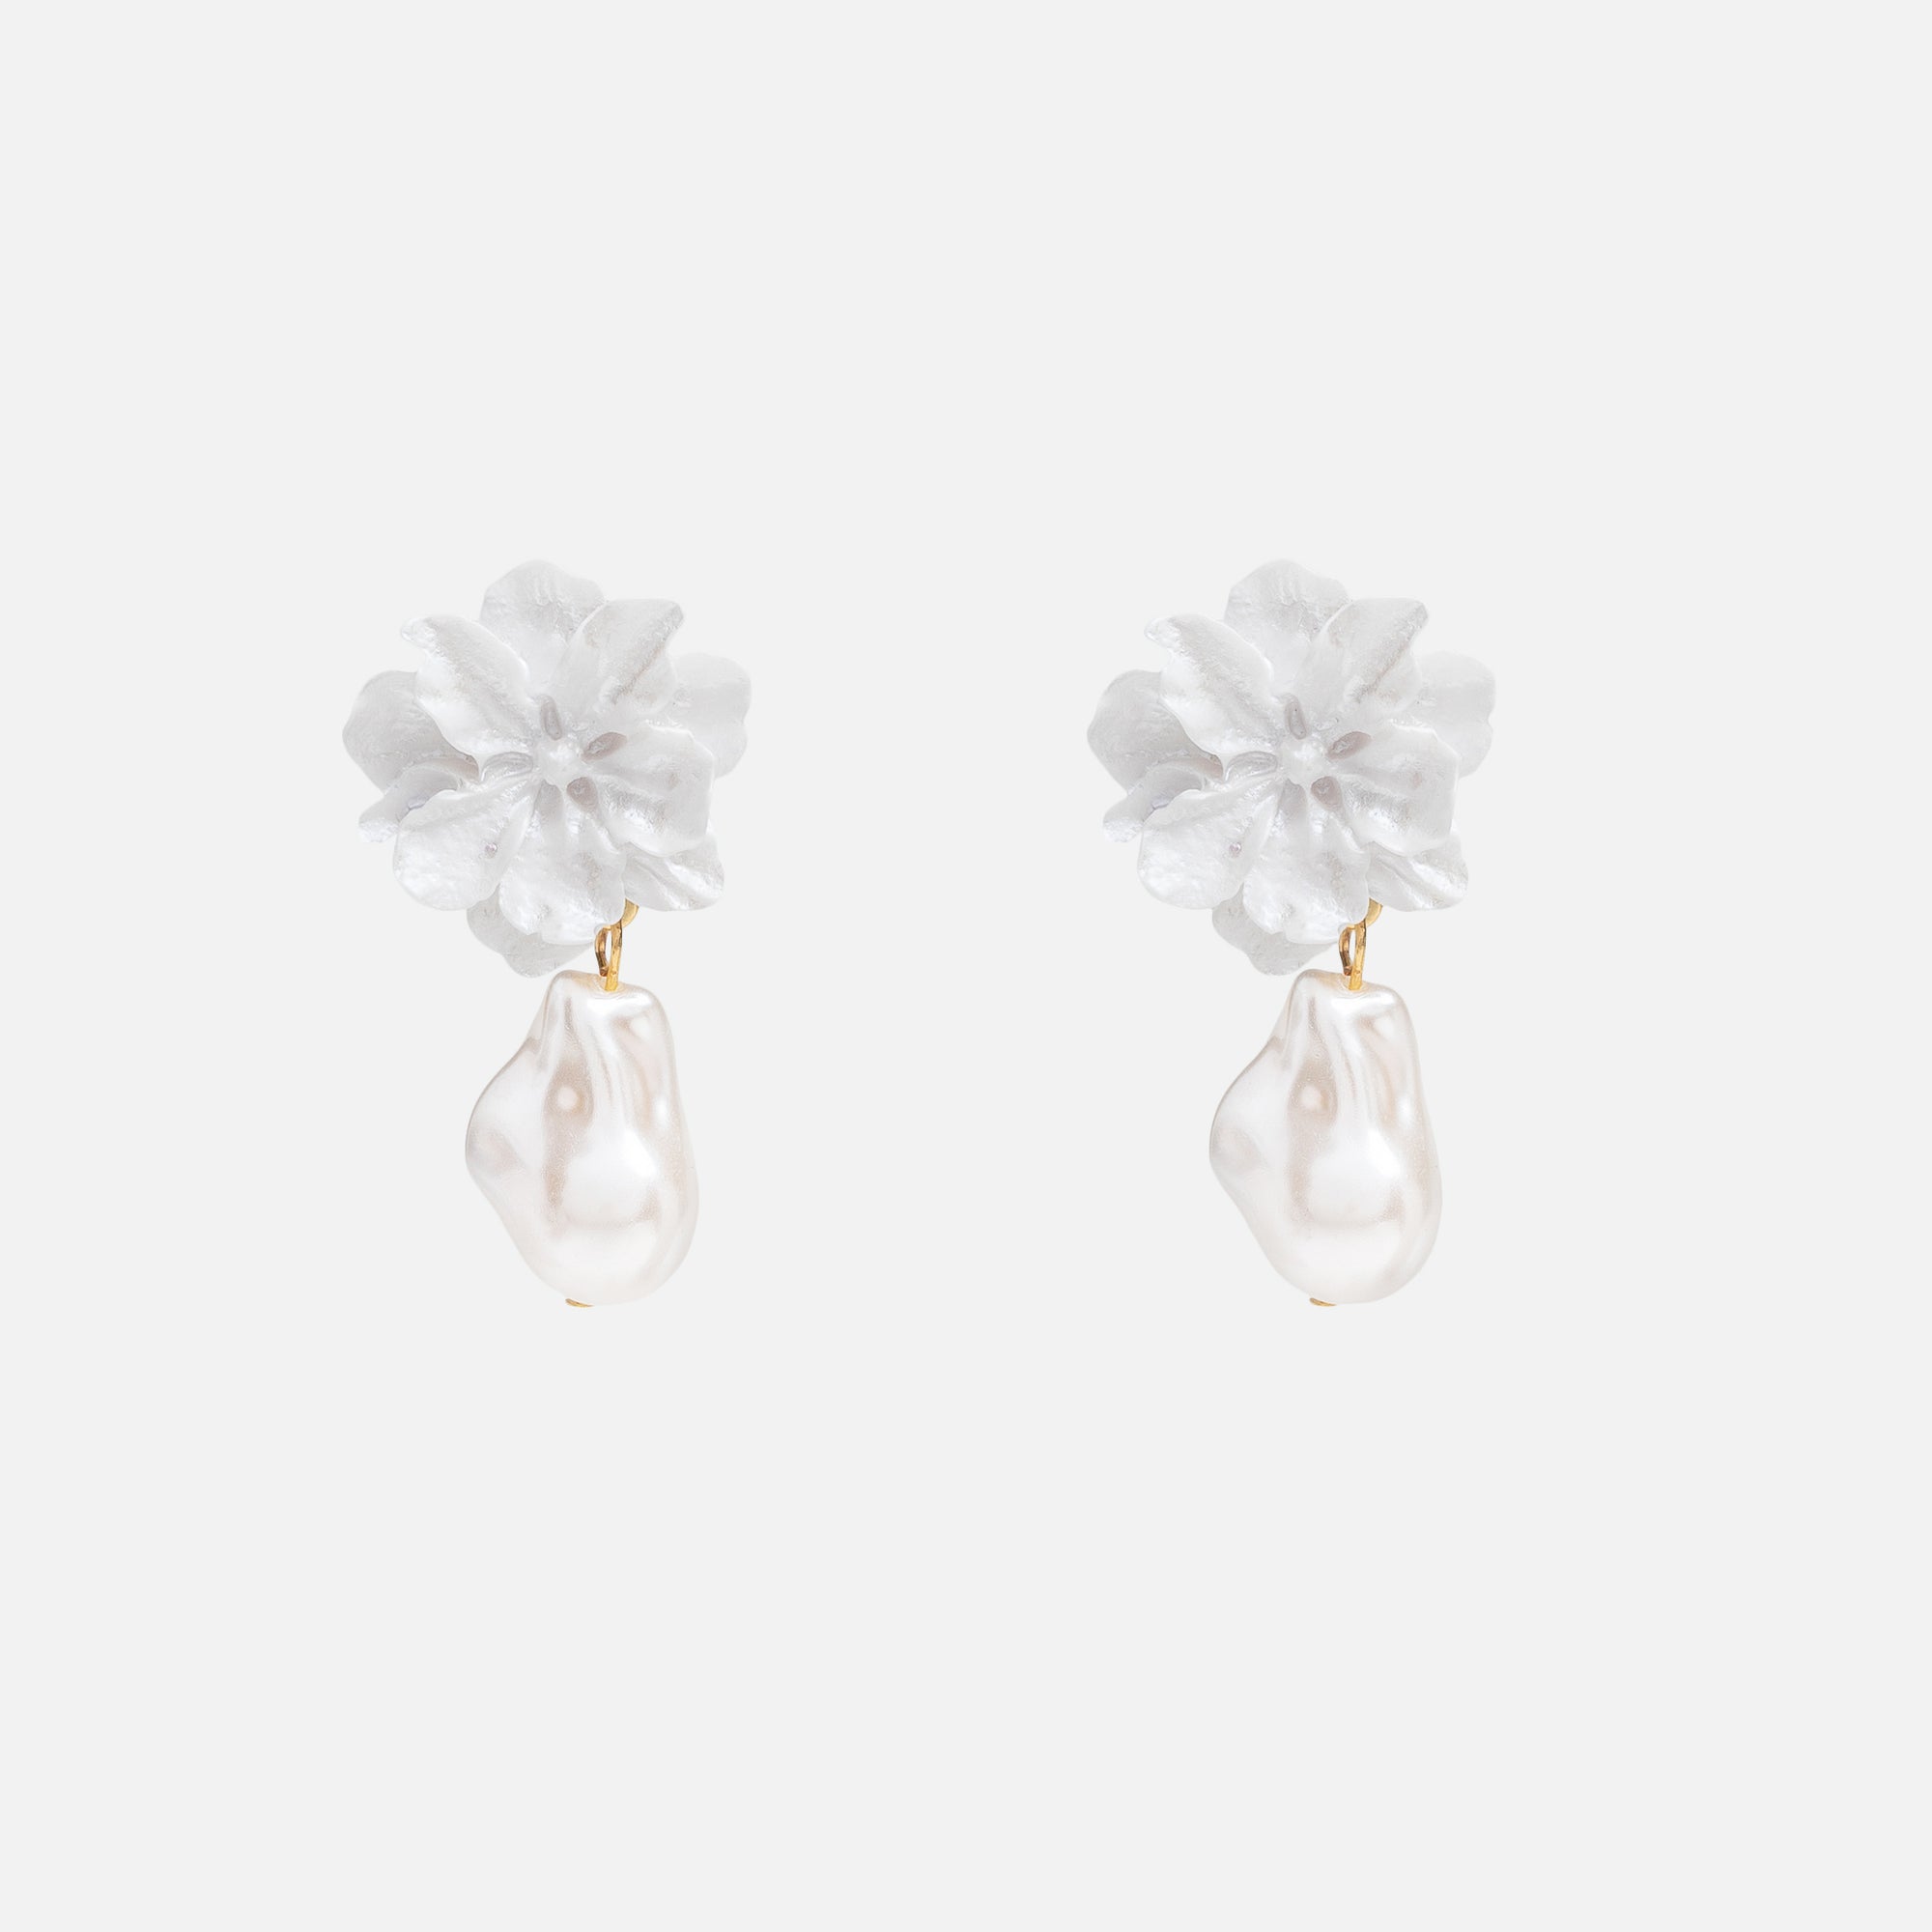 White earrings with pearls and flowers